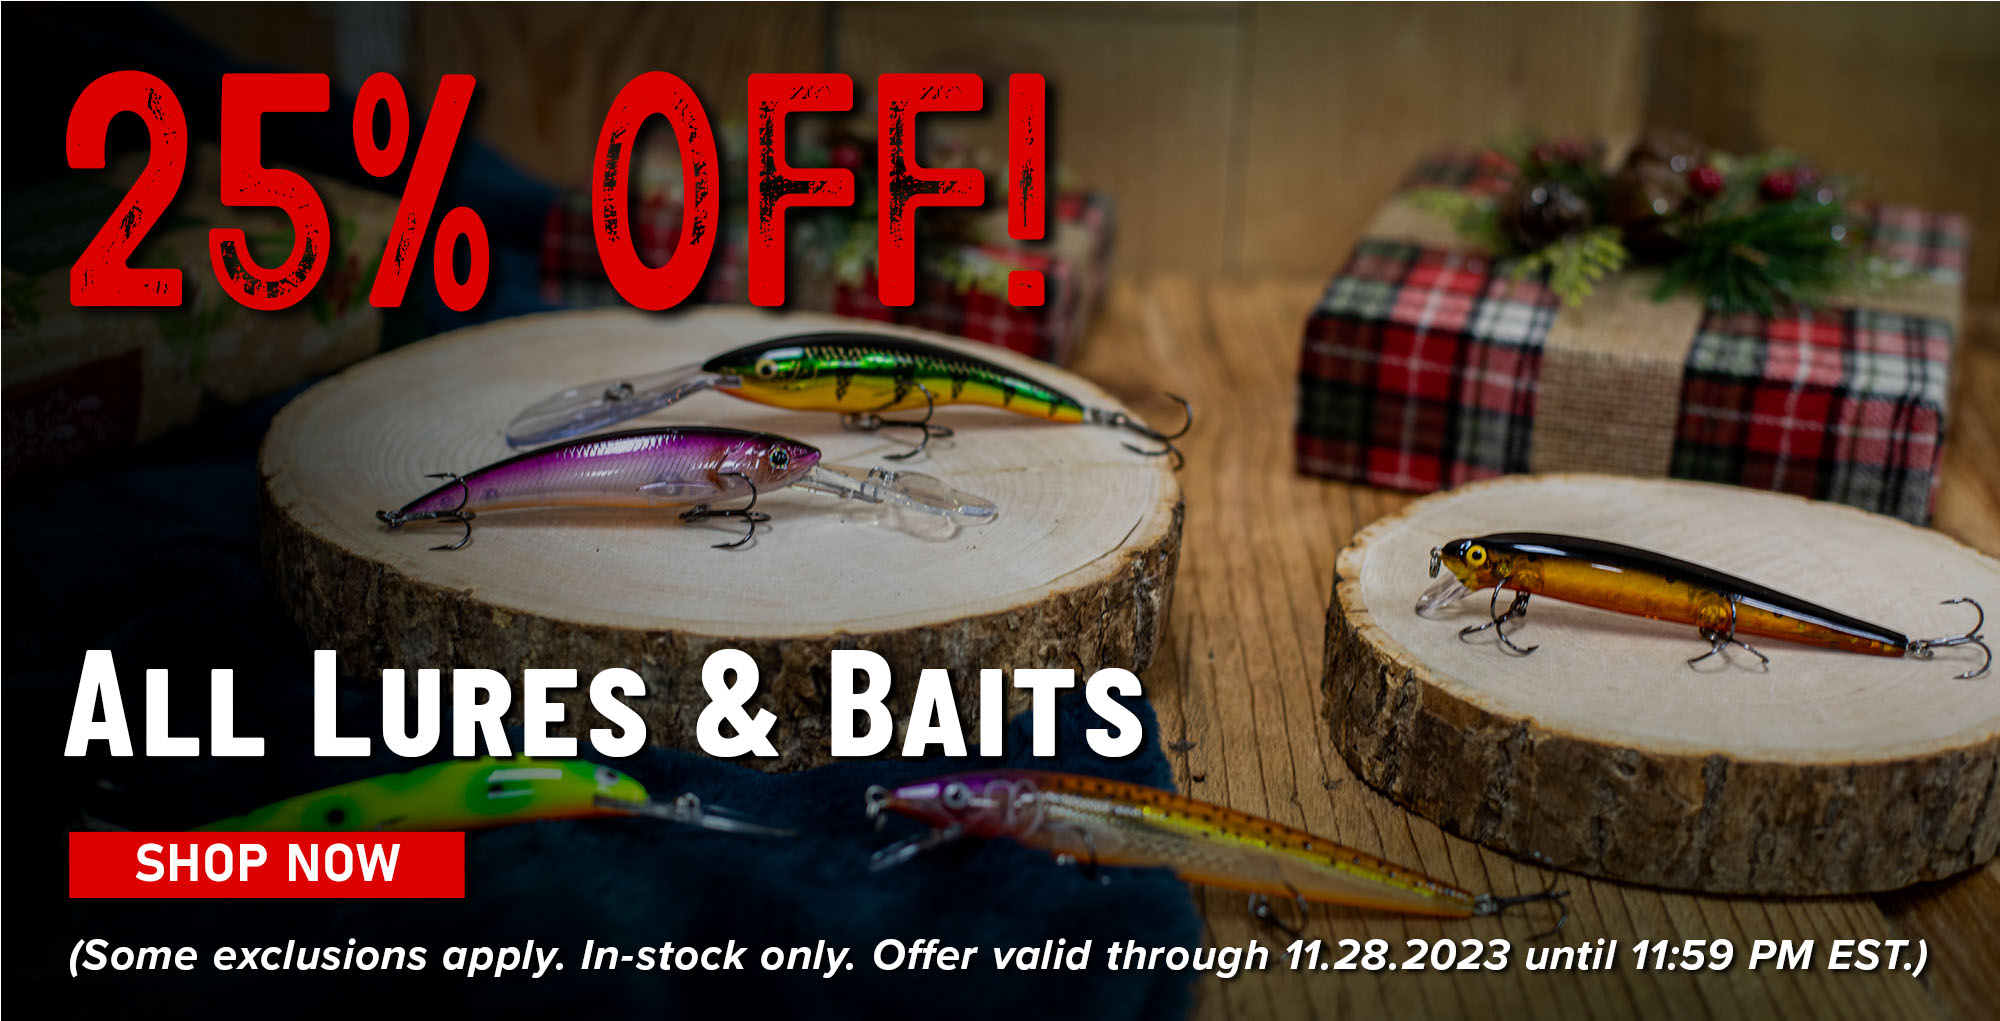 25% Off All Lures & Baits Shop Now (Some exclusions apply. In-stock only. Offer valid through 11.28.2023 until 11:59 PM EST.)